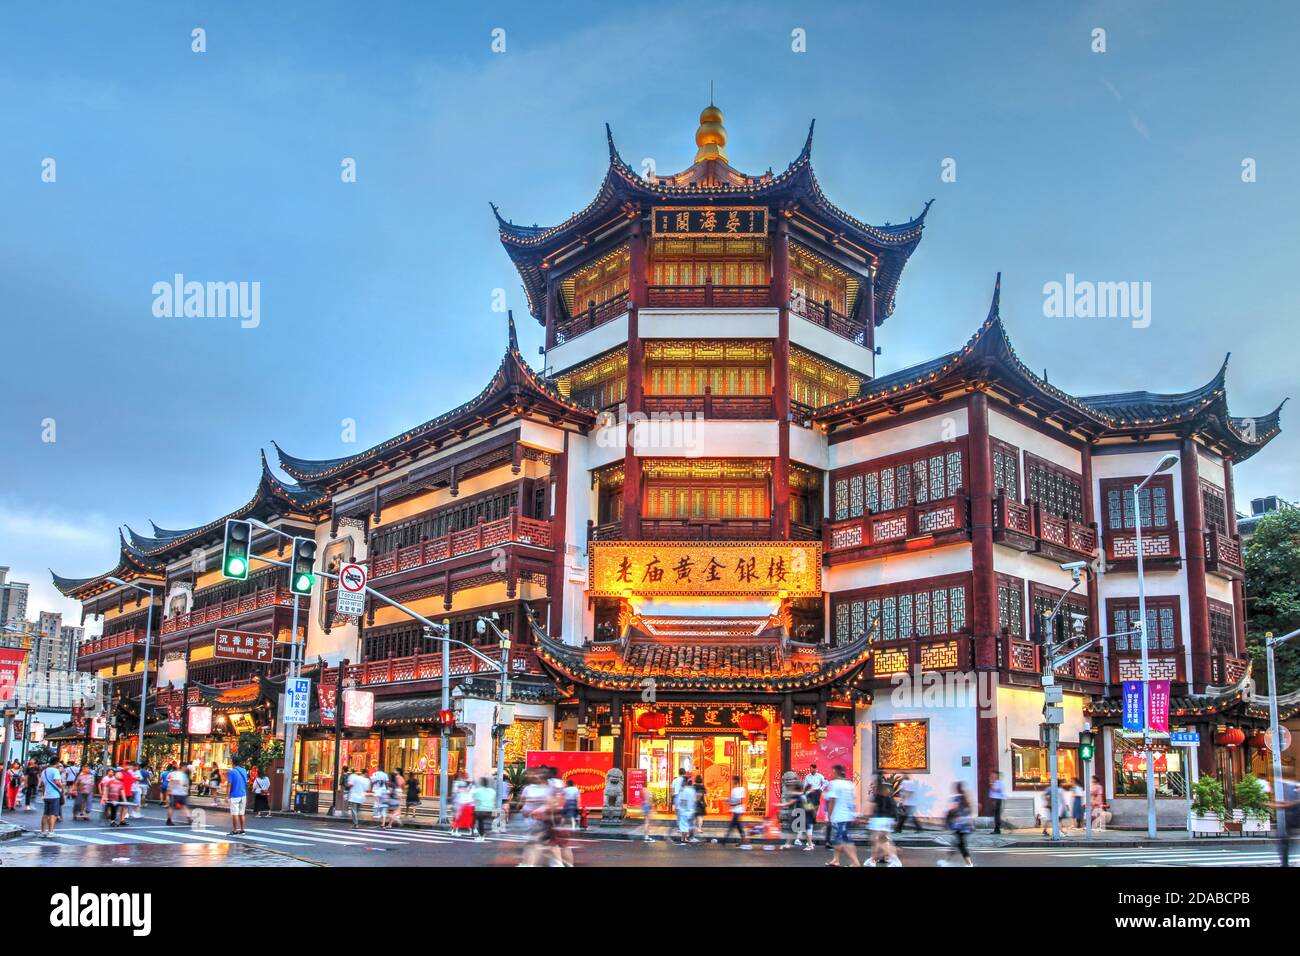 Shanghai, China - August 4, 2019 - Twilight scene in old town of Shanghai, China in the vicinity of Yu Gardens, featuring one of the traditional archi Stock Photo